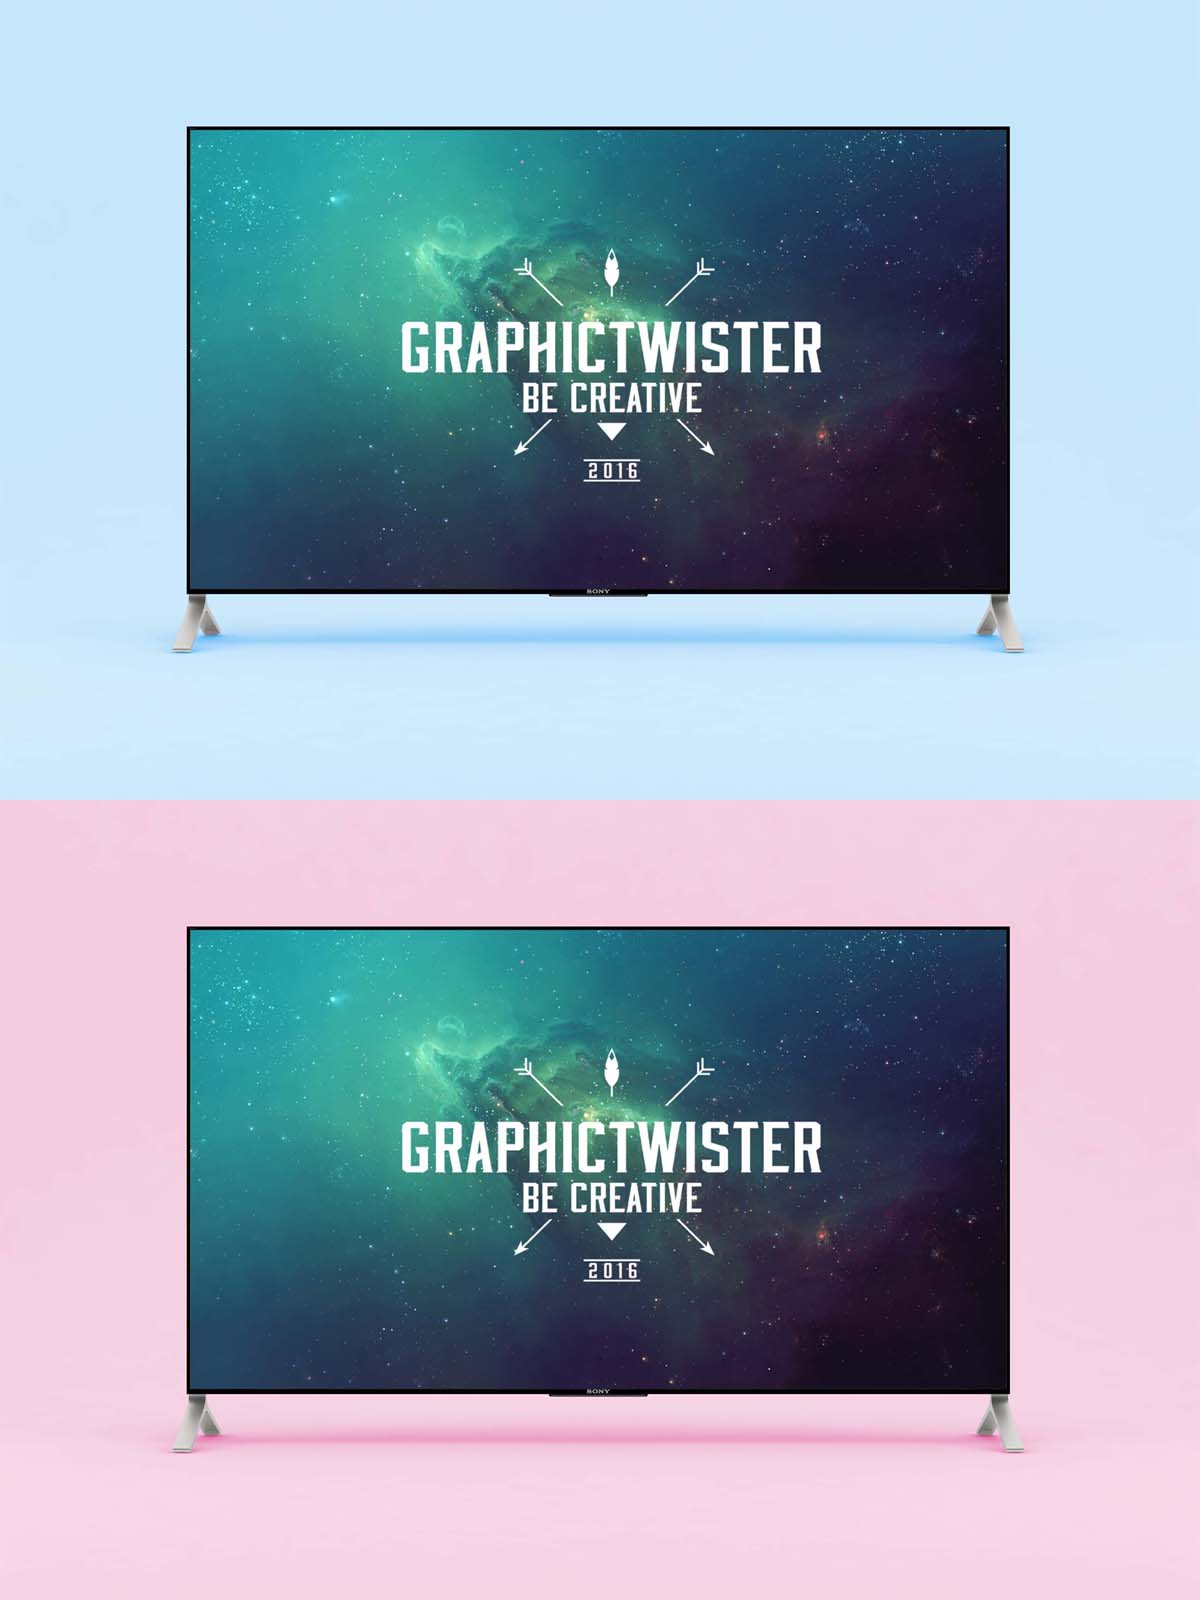 Download Free Smart TV 4K Mockup (PSD) - Find the Perfect Creative Mockups Freebies to Showcase your ...